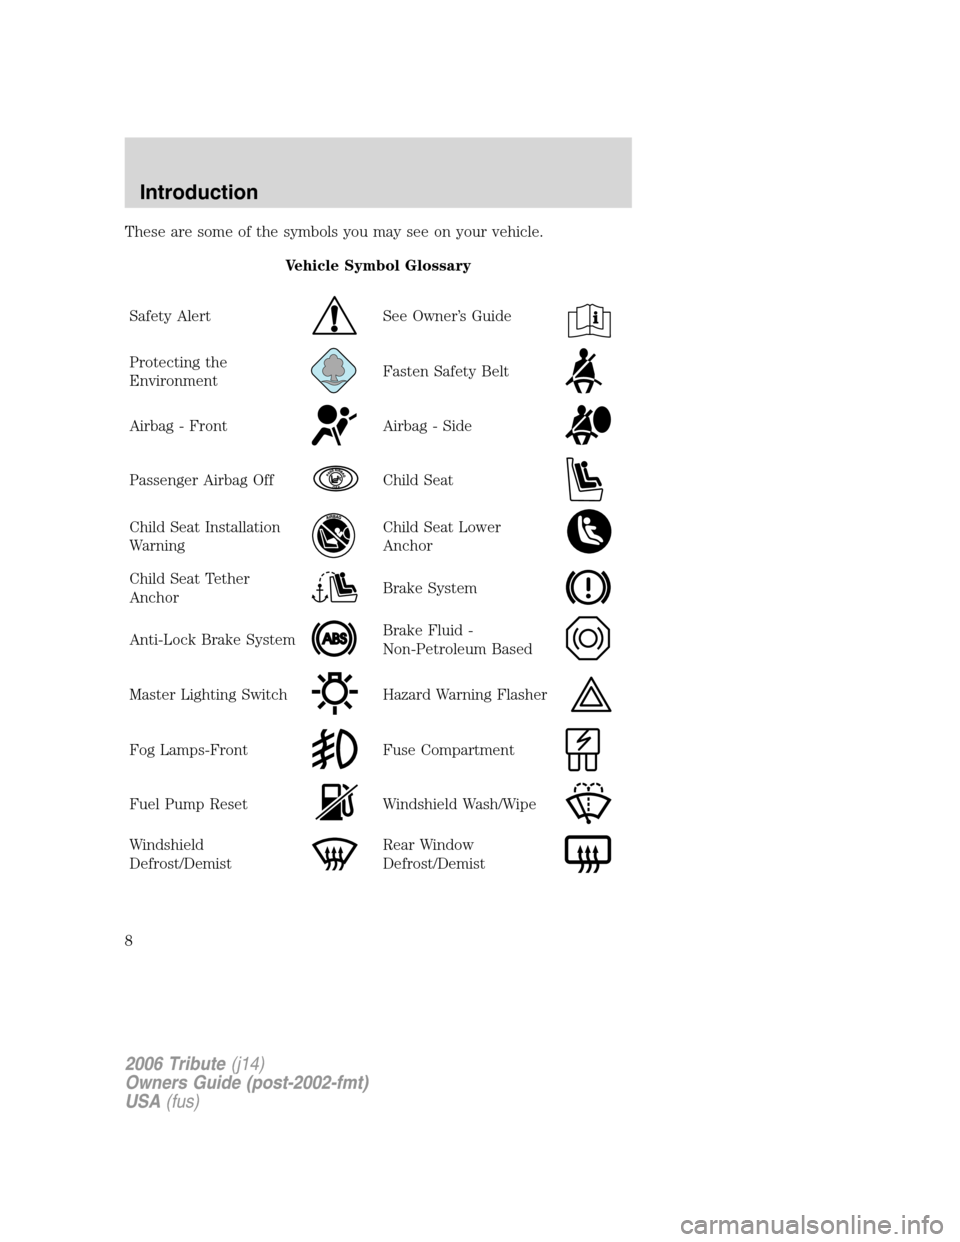 MAZDA MODEL TRIBUTE 2006  Owners Manual (in English) These are some of the symbols you may see on your vehicle.
Vehicle Symbol Glossary
Safety Alert
See Owner’s Guide
Protecting the
EnvironmentFasten Safety Belt
Airbag - FrontAirbag - Side
Passenger A